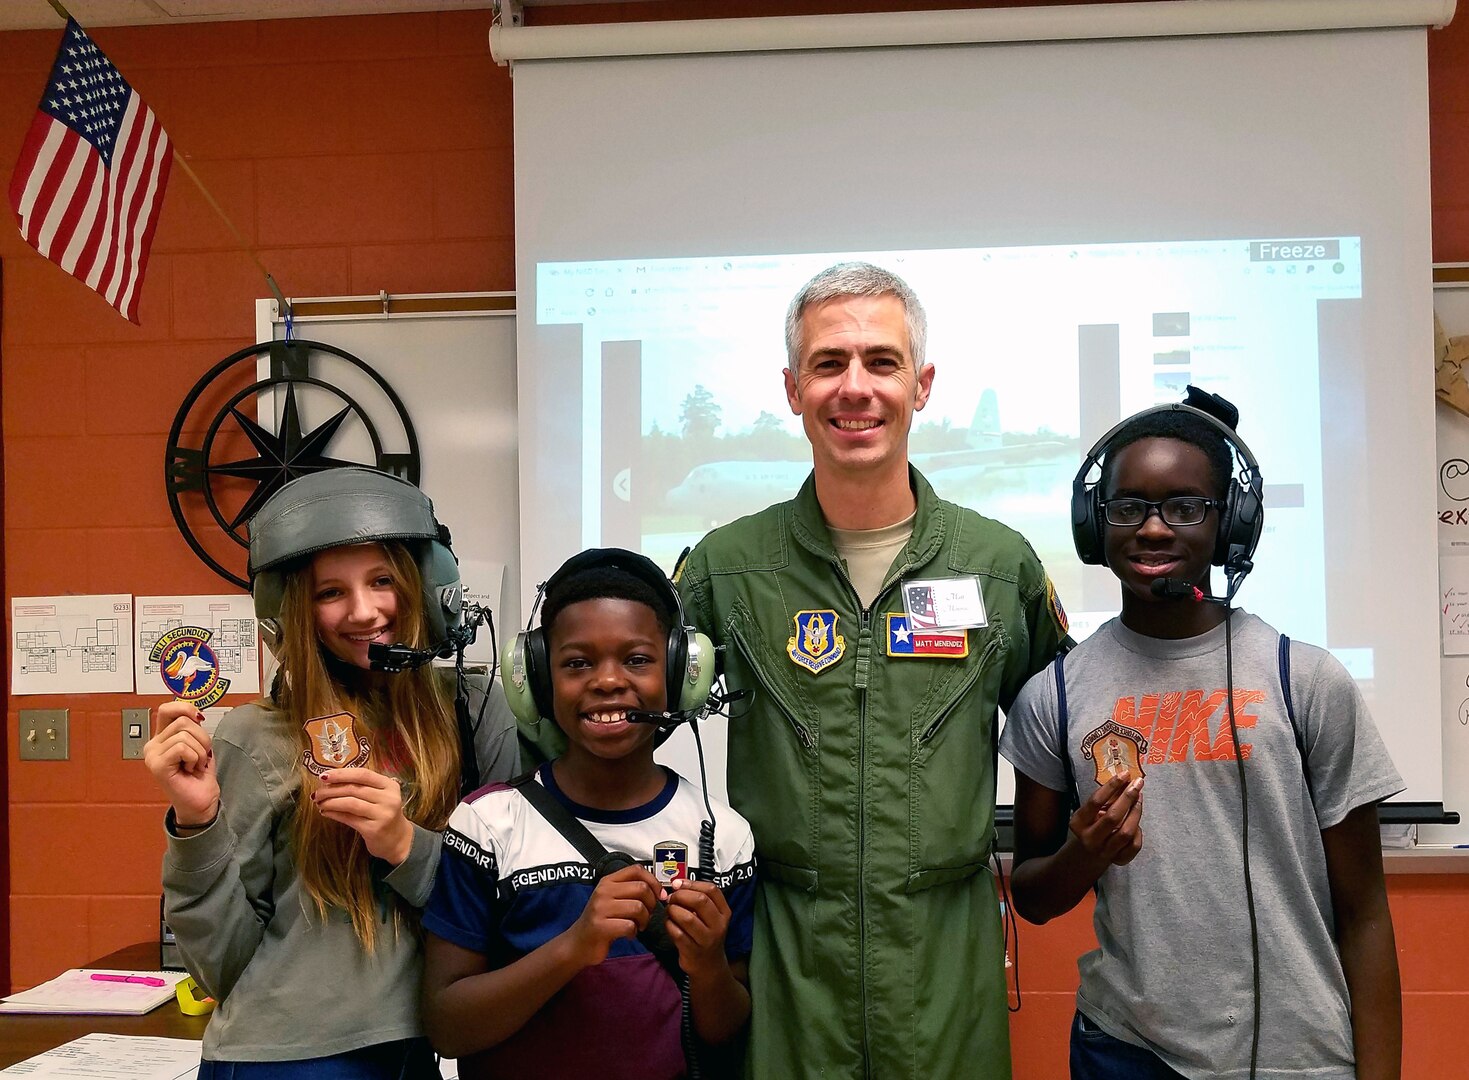 Maj. Matthew Menendez, 68th Airlift Squadron pilot, Joint Base San Antonio-Lackland, Texas, awards patches and coins to students, Casey Finn, Owen Coleman, and David Oludare at Dolph Briscoe Middle School, Nov. 11, 2019, during Northside Independent School District’s 10th annual, Veterans Day ceremony for Veterans Appreciation Day.